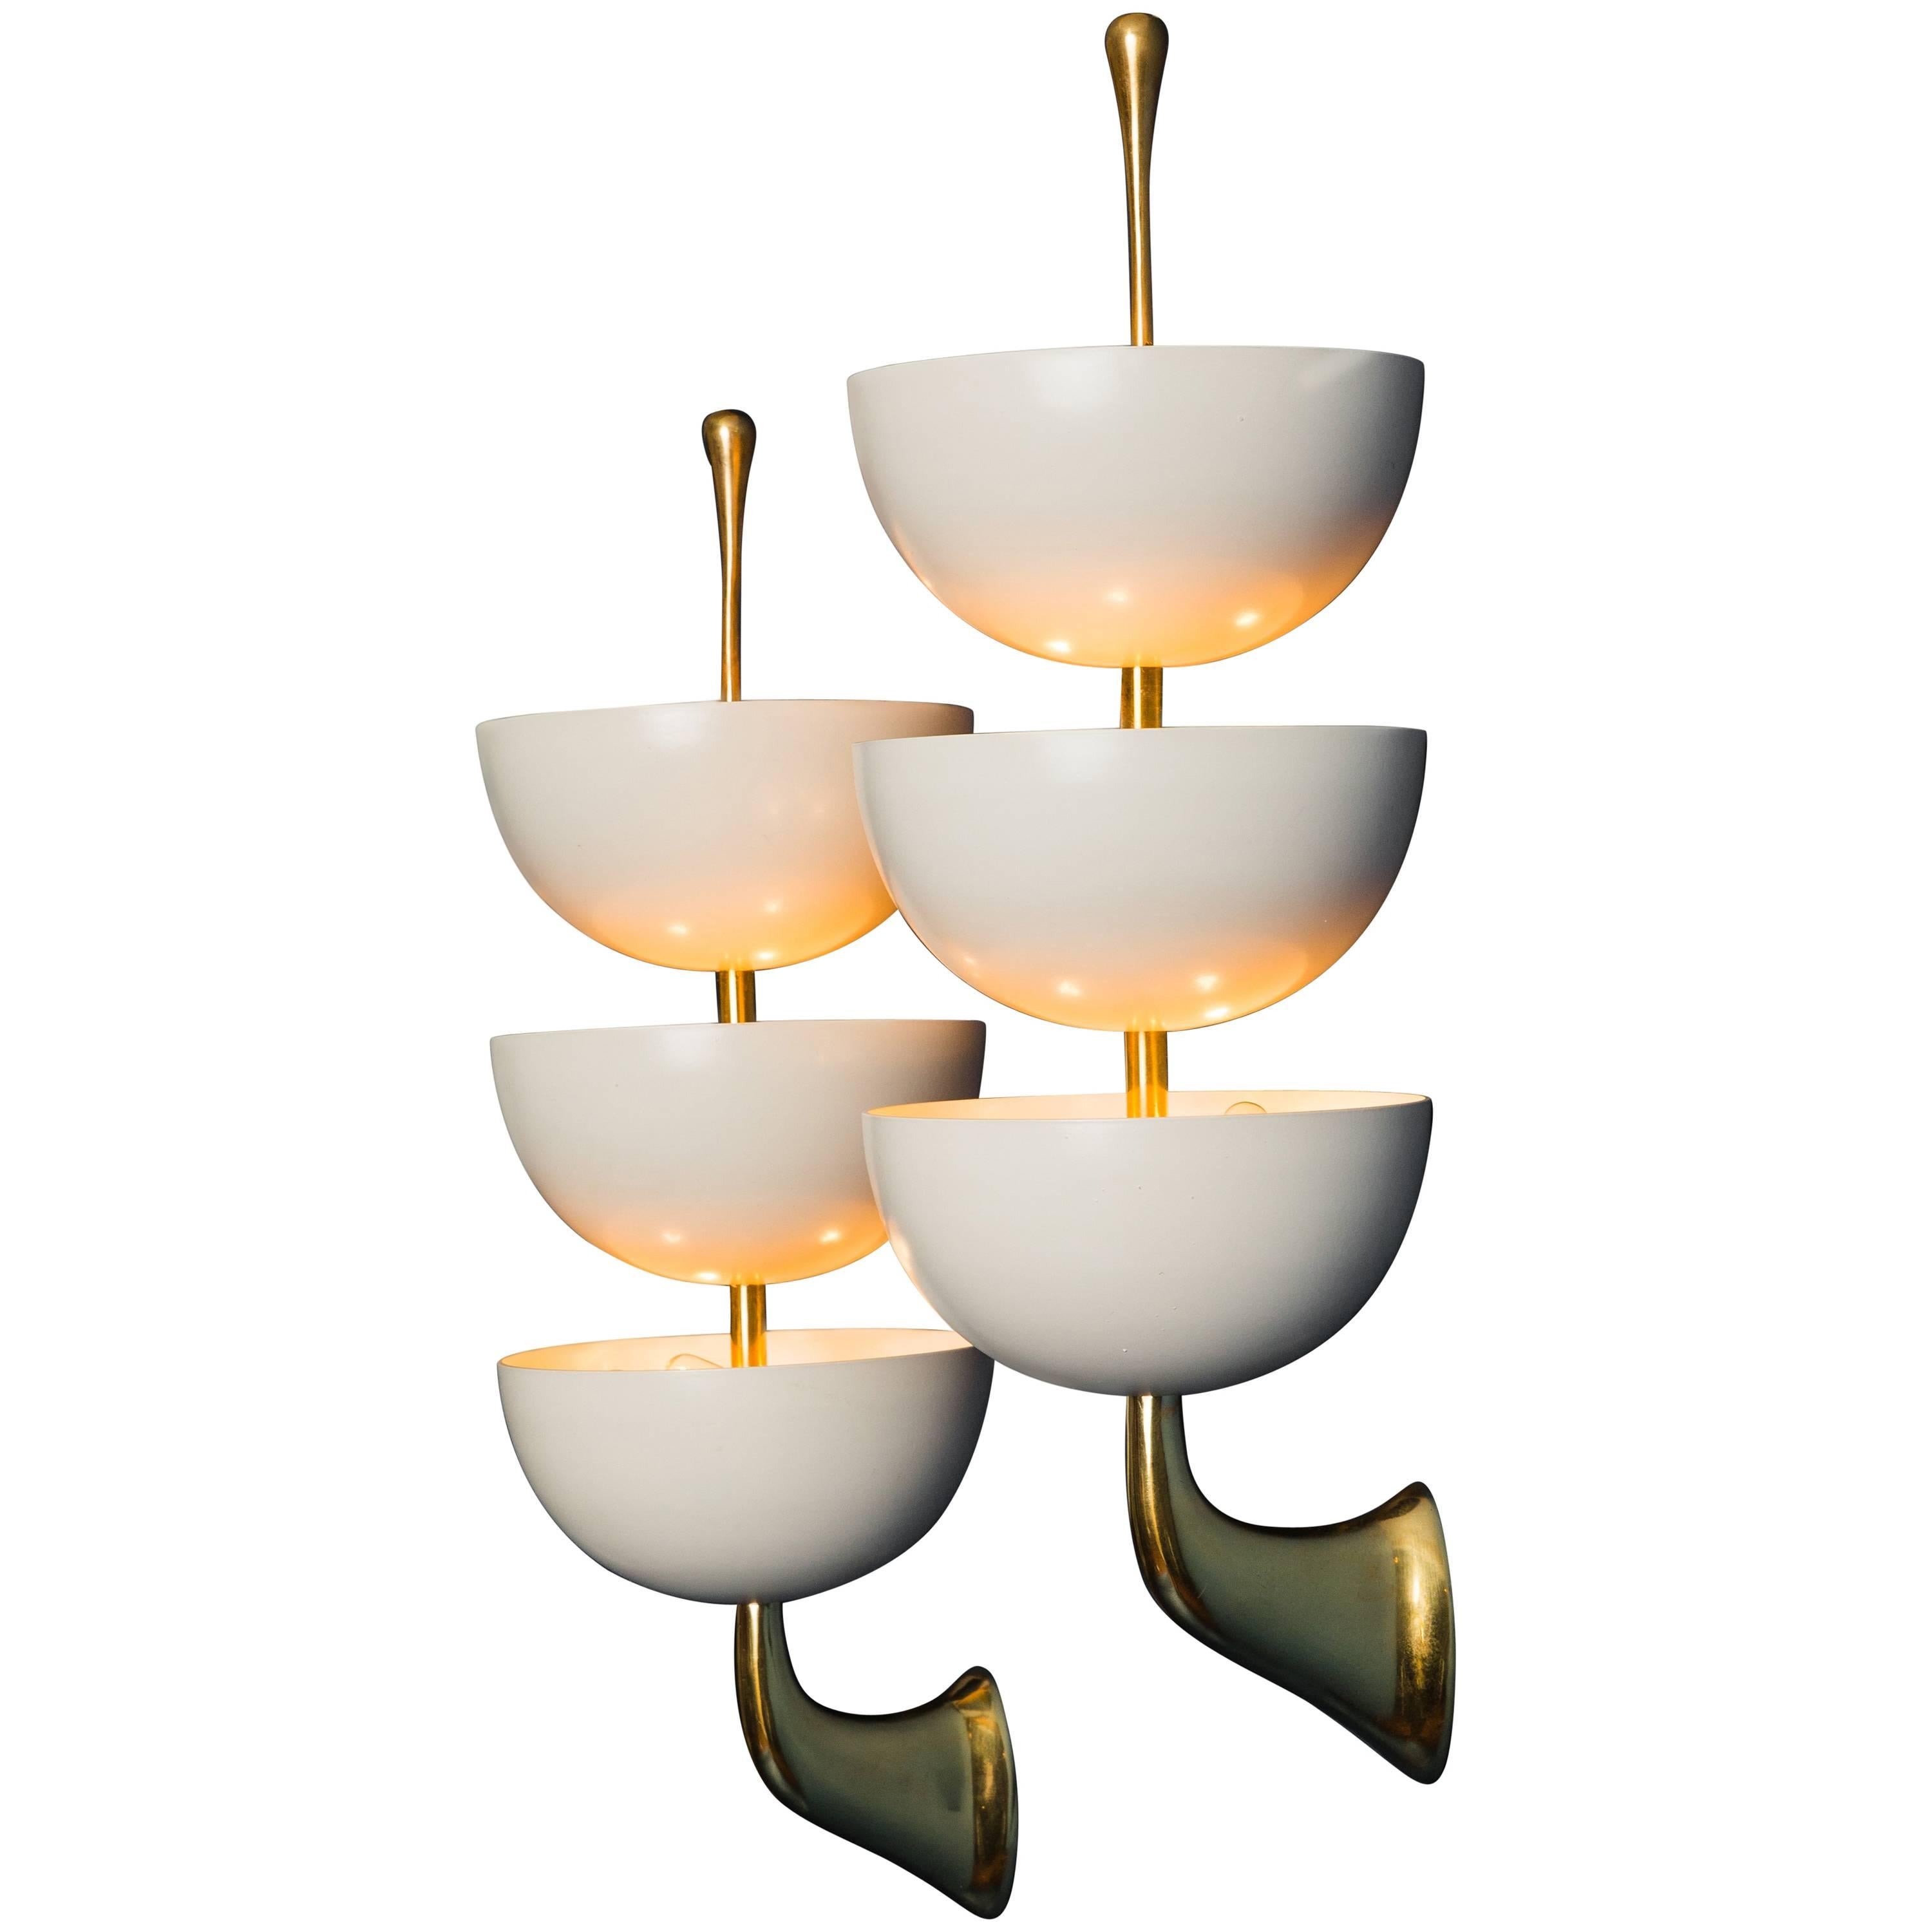 Stilnovo rare original pair of sconces with three eggshell white lacquered metal cups mounted on gilt lacquered brass structure, Italy, circa 1952. Stamped 'STILNOVO' on finials. 
Rewired to U.S. standards.

Literature:
Charlotte & Peter Fiell,